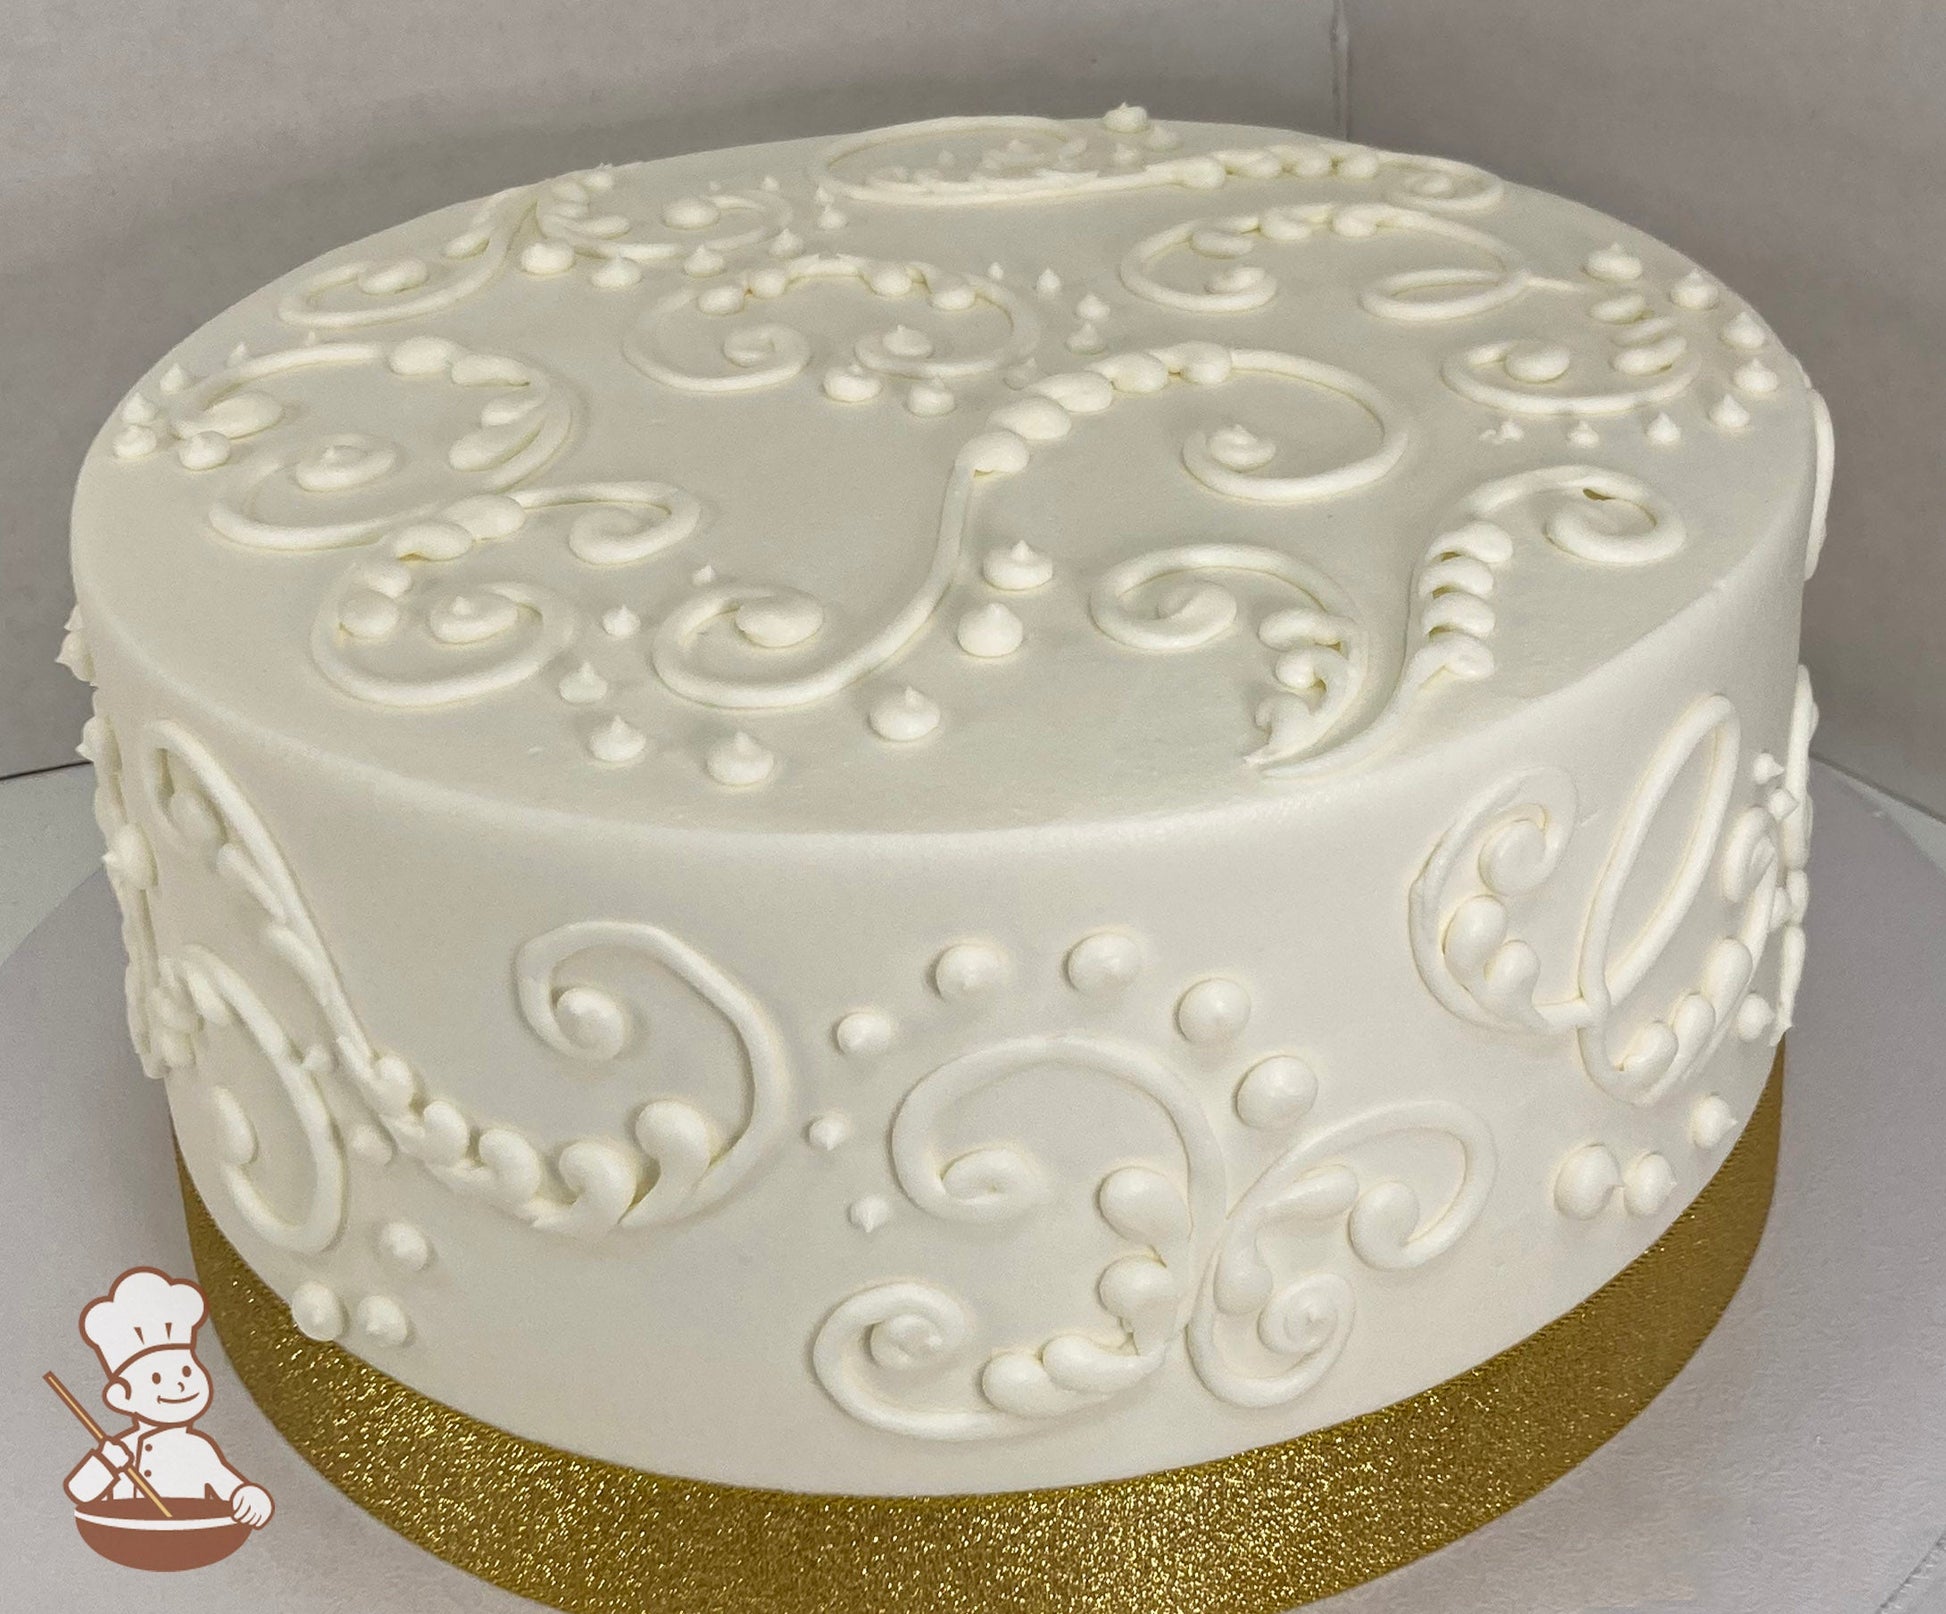 Round cake with white icing and white buttercream scrolls and dots on cake walls and on top of cake and a gold ribbon on the base of the cake.